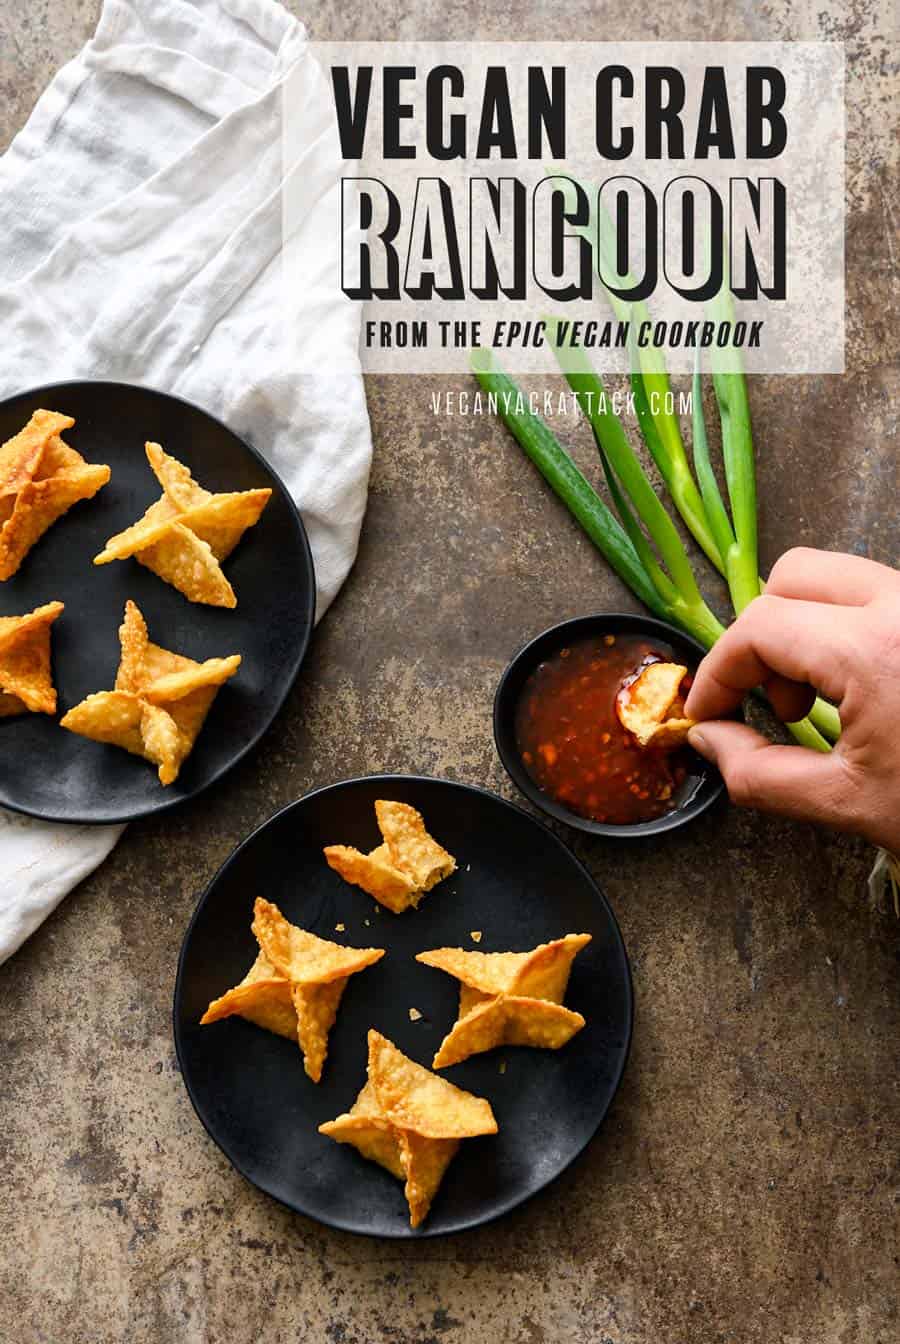 A hand dipping vegan Crab Rangoon into sweet chili sauce, with two black plates of Crab Rangoon, on a napkin and grey background. Text on image reads "Vegan Crab Rangoon from the Epic Vegan Cookbook"